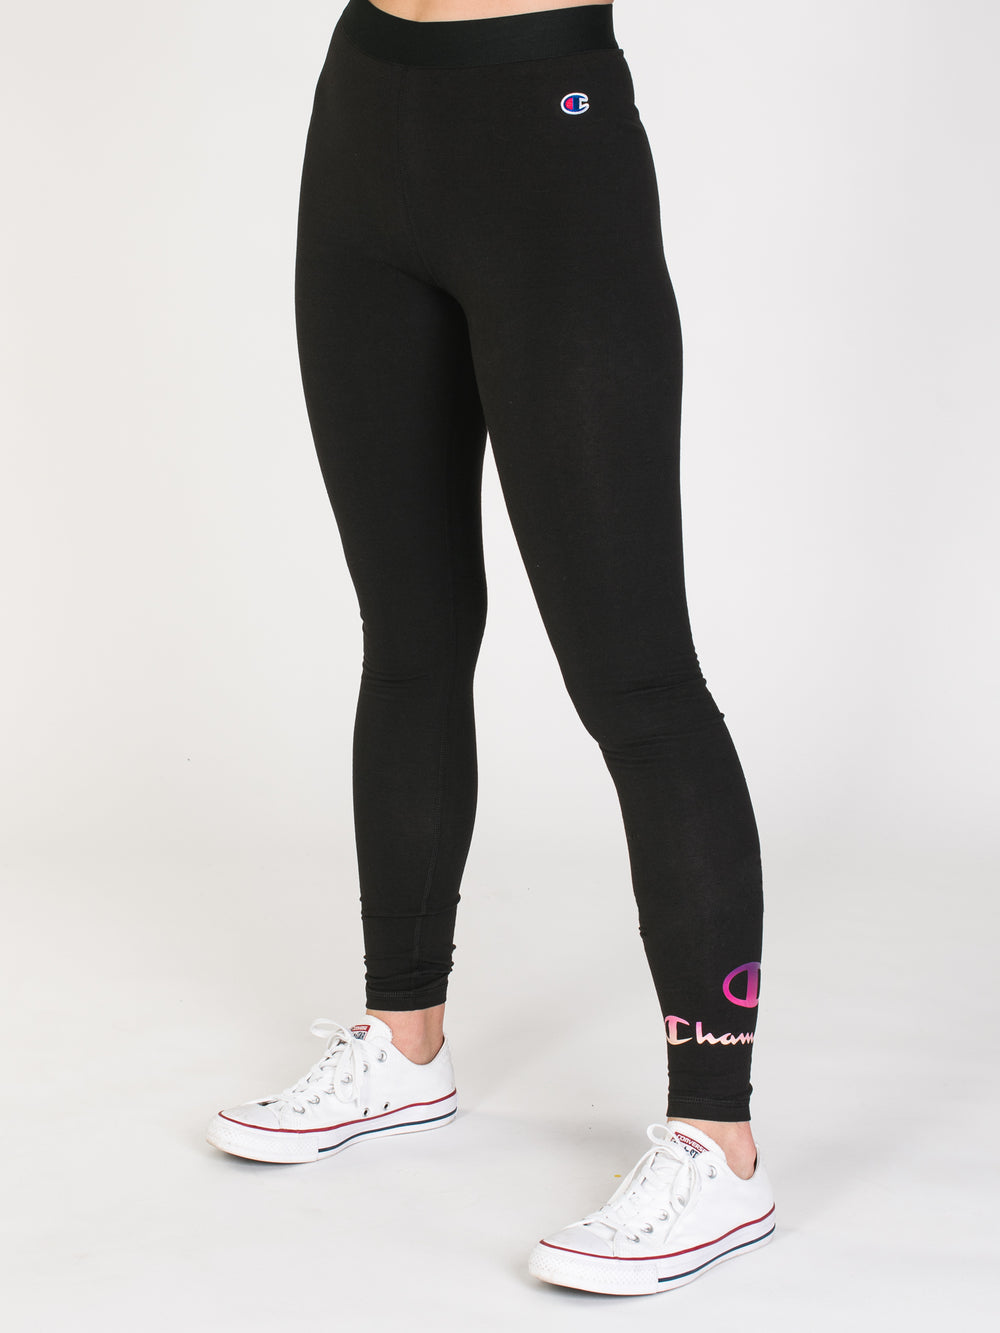 CHAMPION AUTHENTIC LEGGING  - CLEARANCE